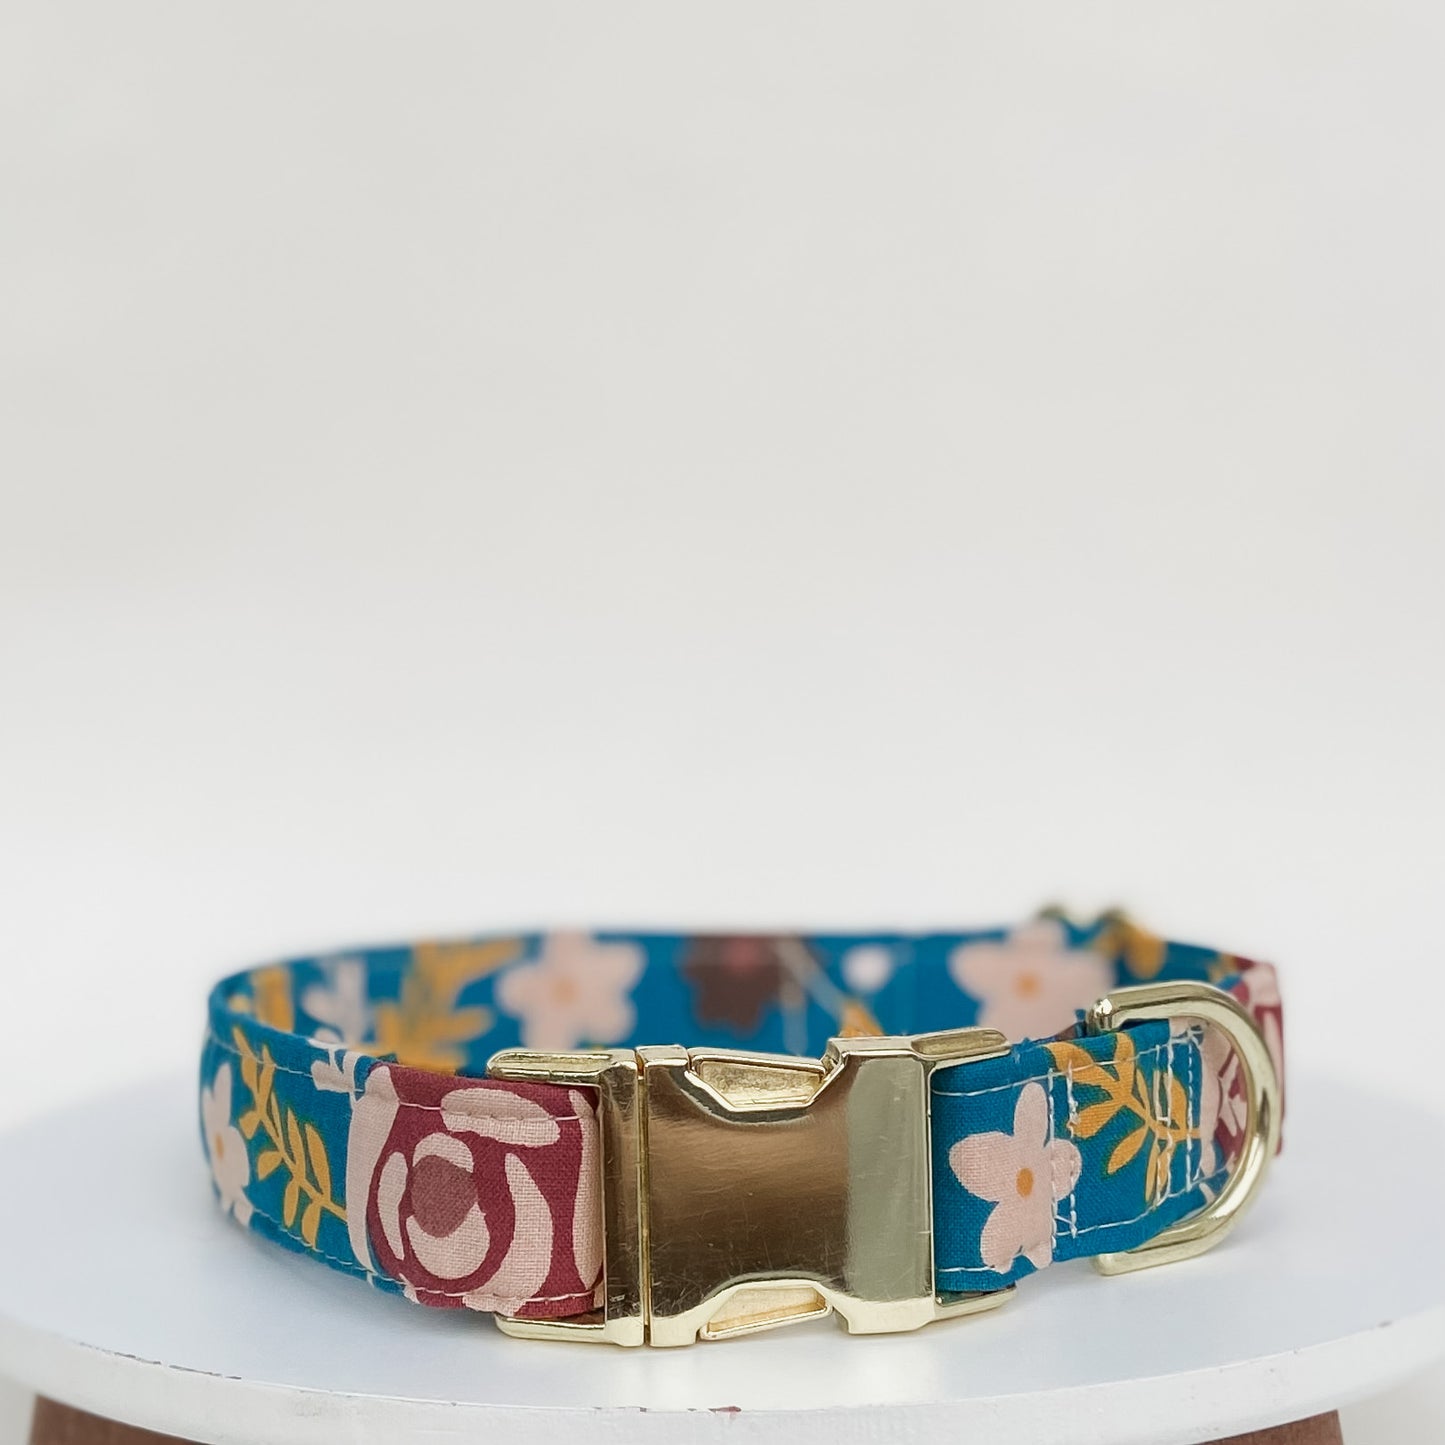 Teal floral dog collar with gold hardware